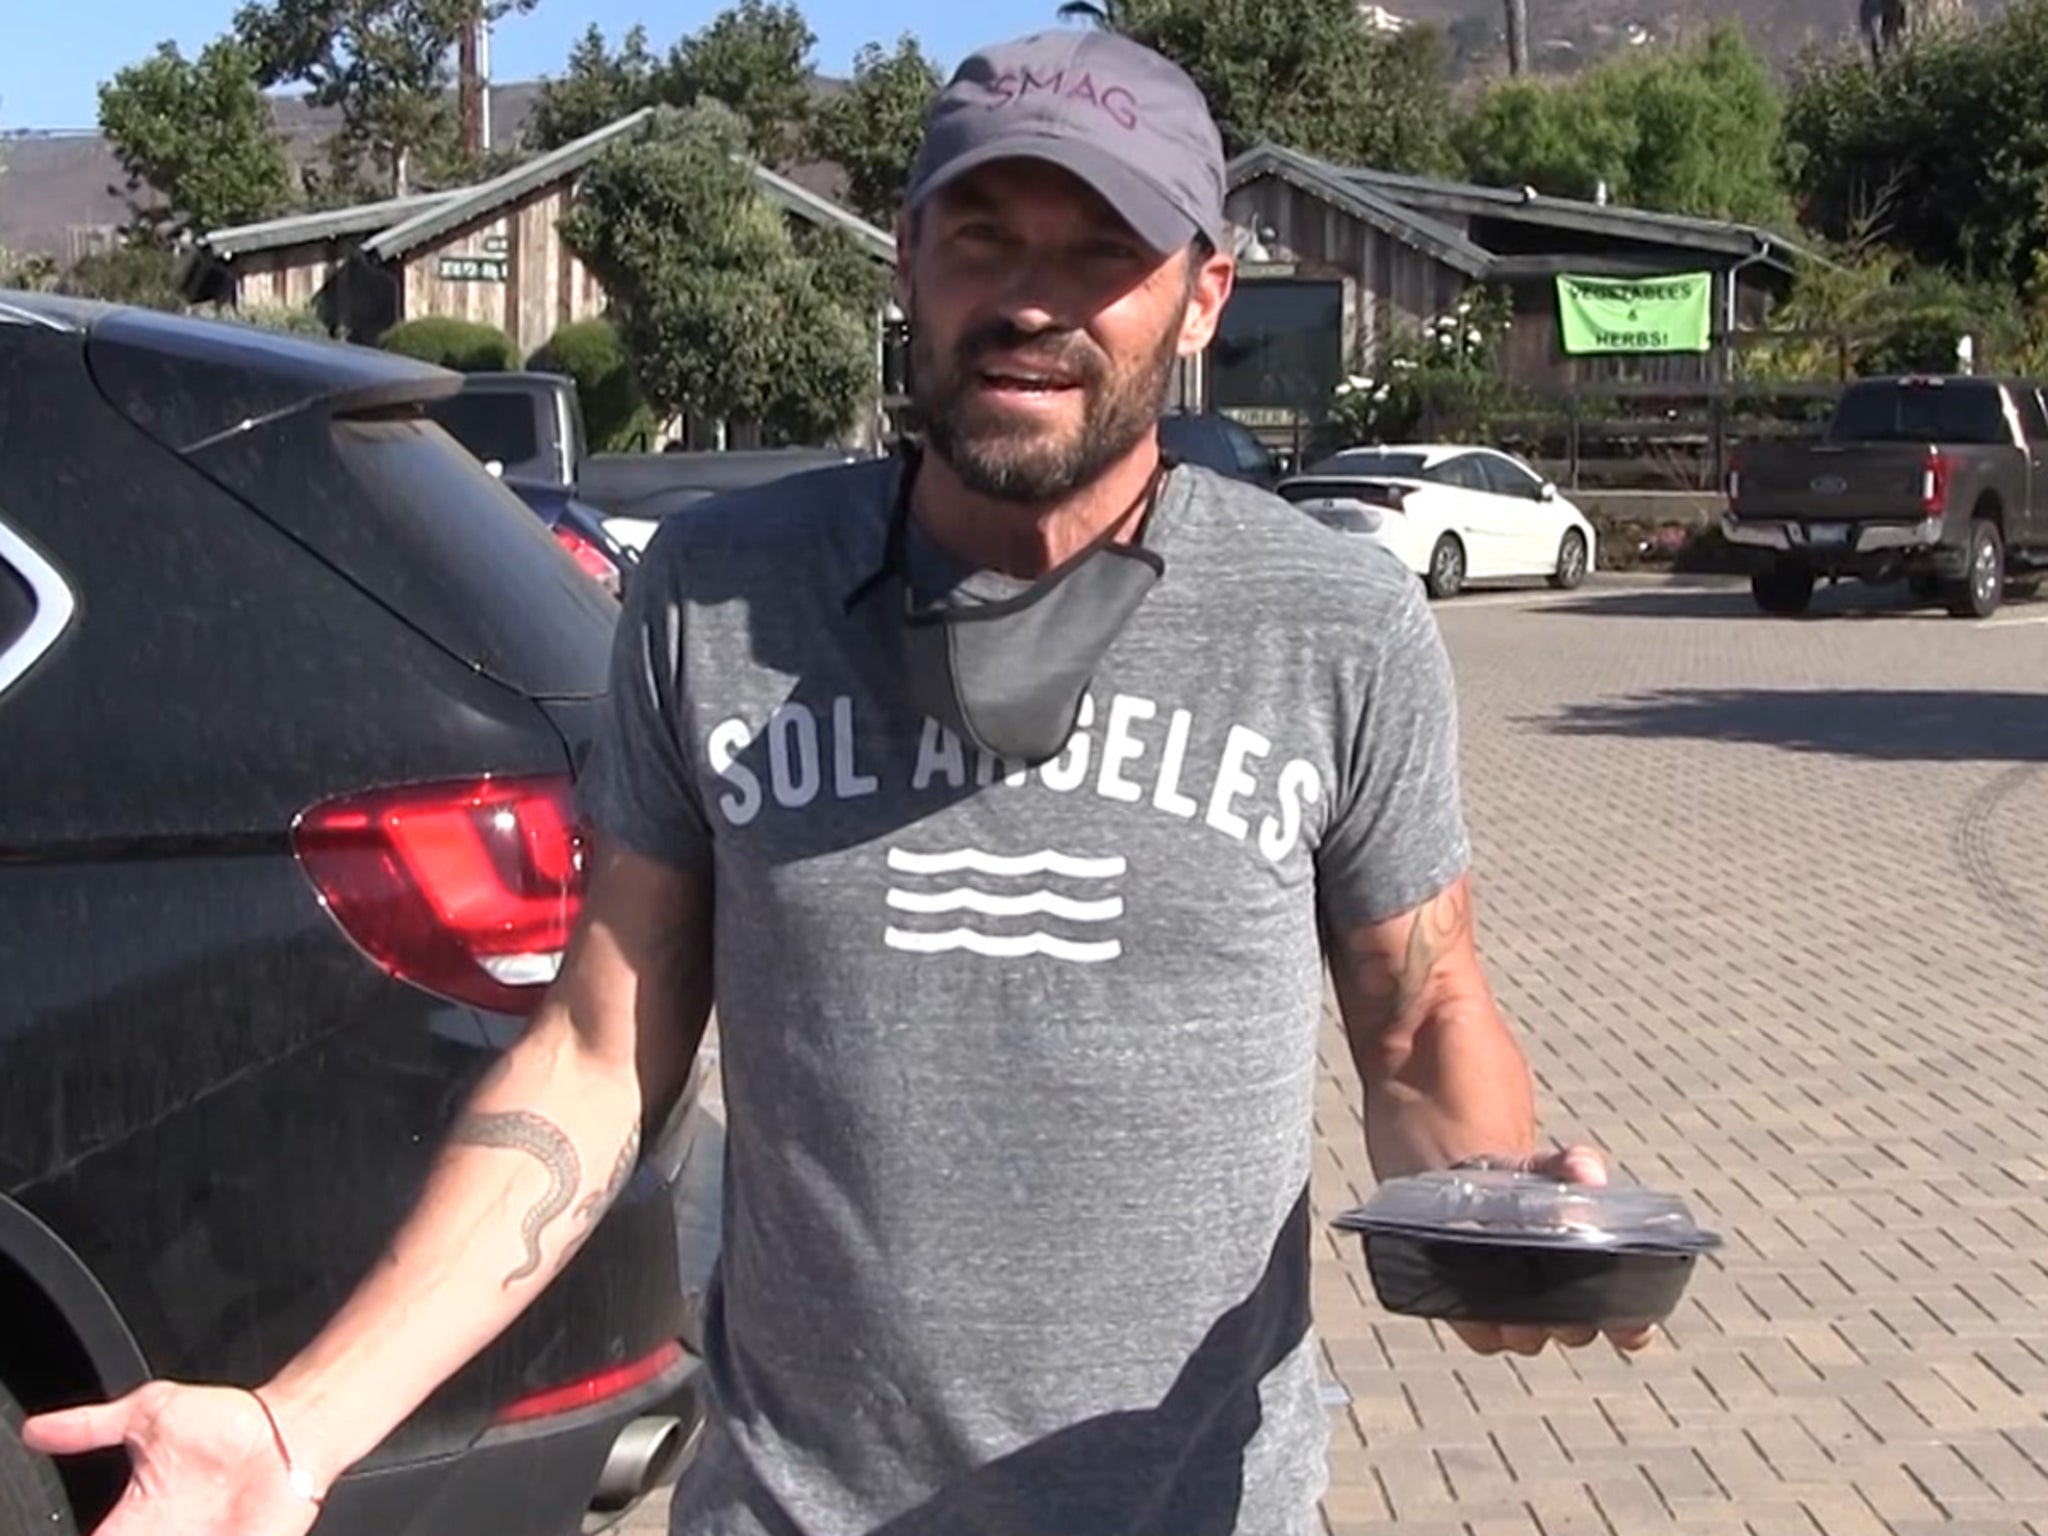 Brian Austin Green Spotted on Lunch Date With Model Tina Louise